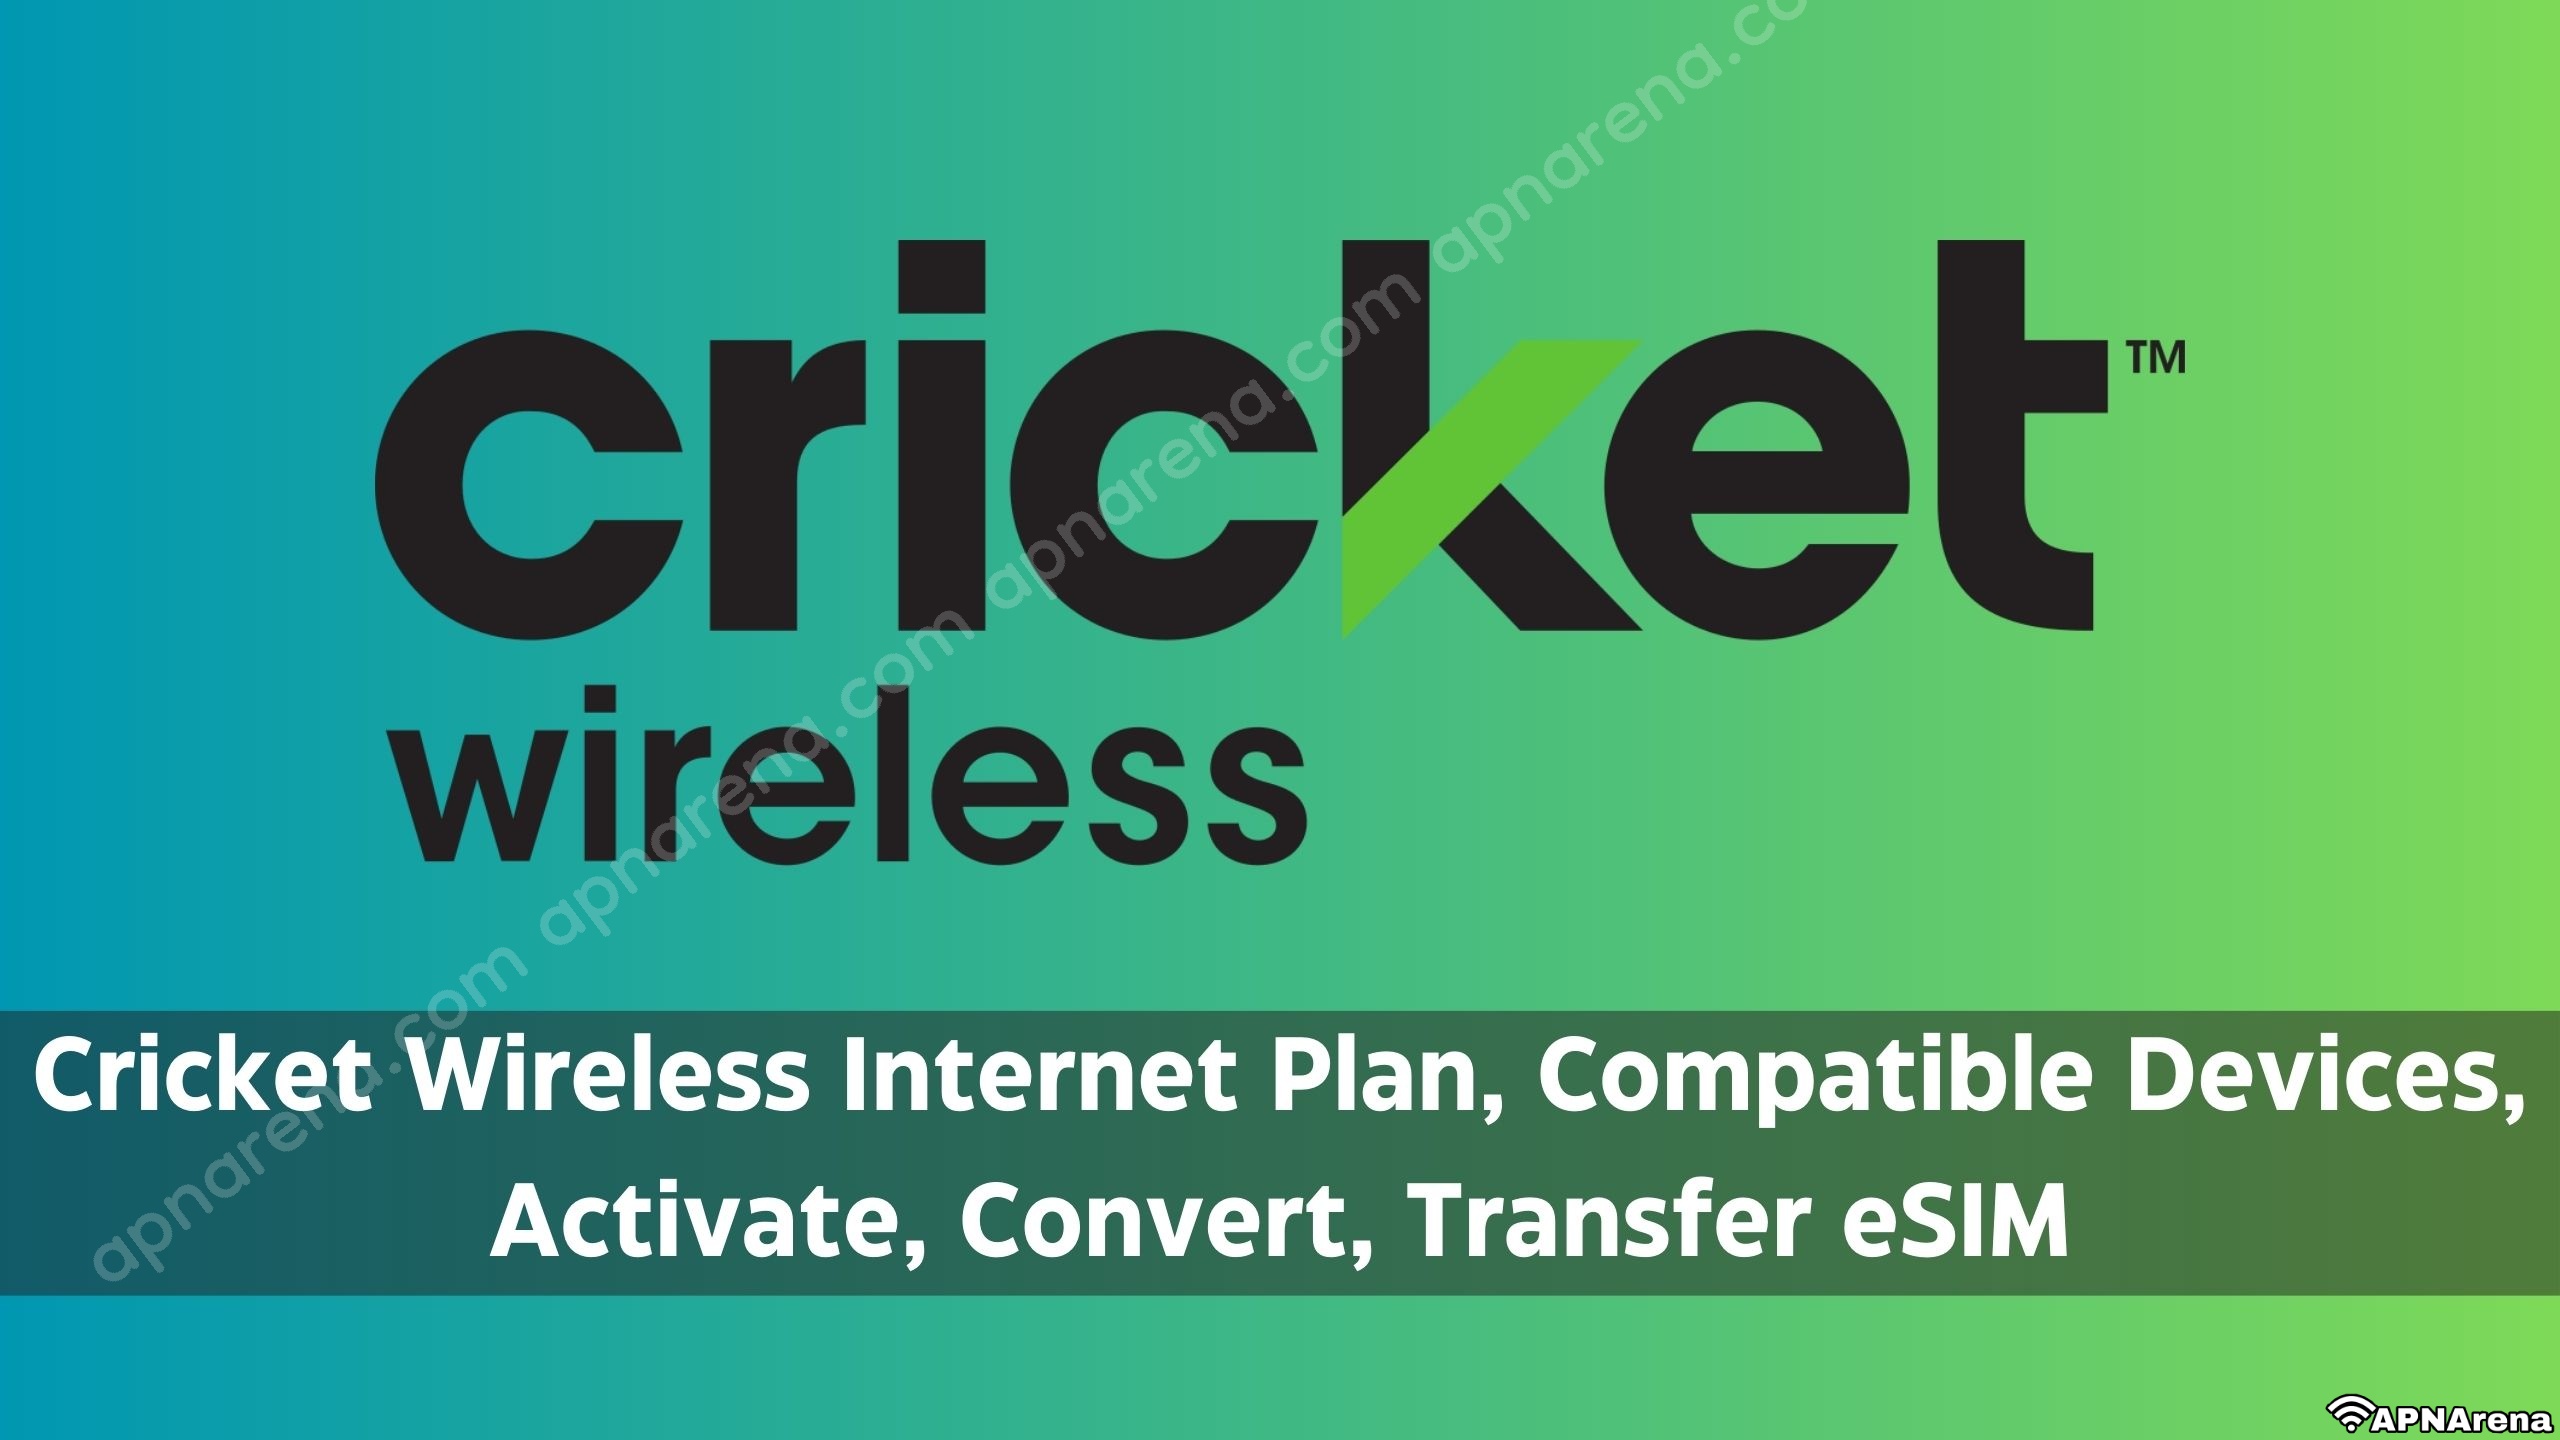 Cricket Wireless Internet Plan and Compatible Devices | Activate eSIM, Convert Wireless SIM to eSIM, Transfer eSIM to a New Phone